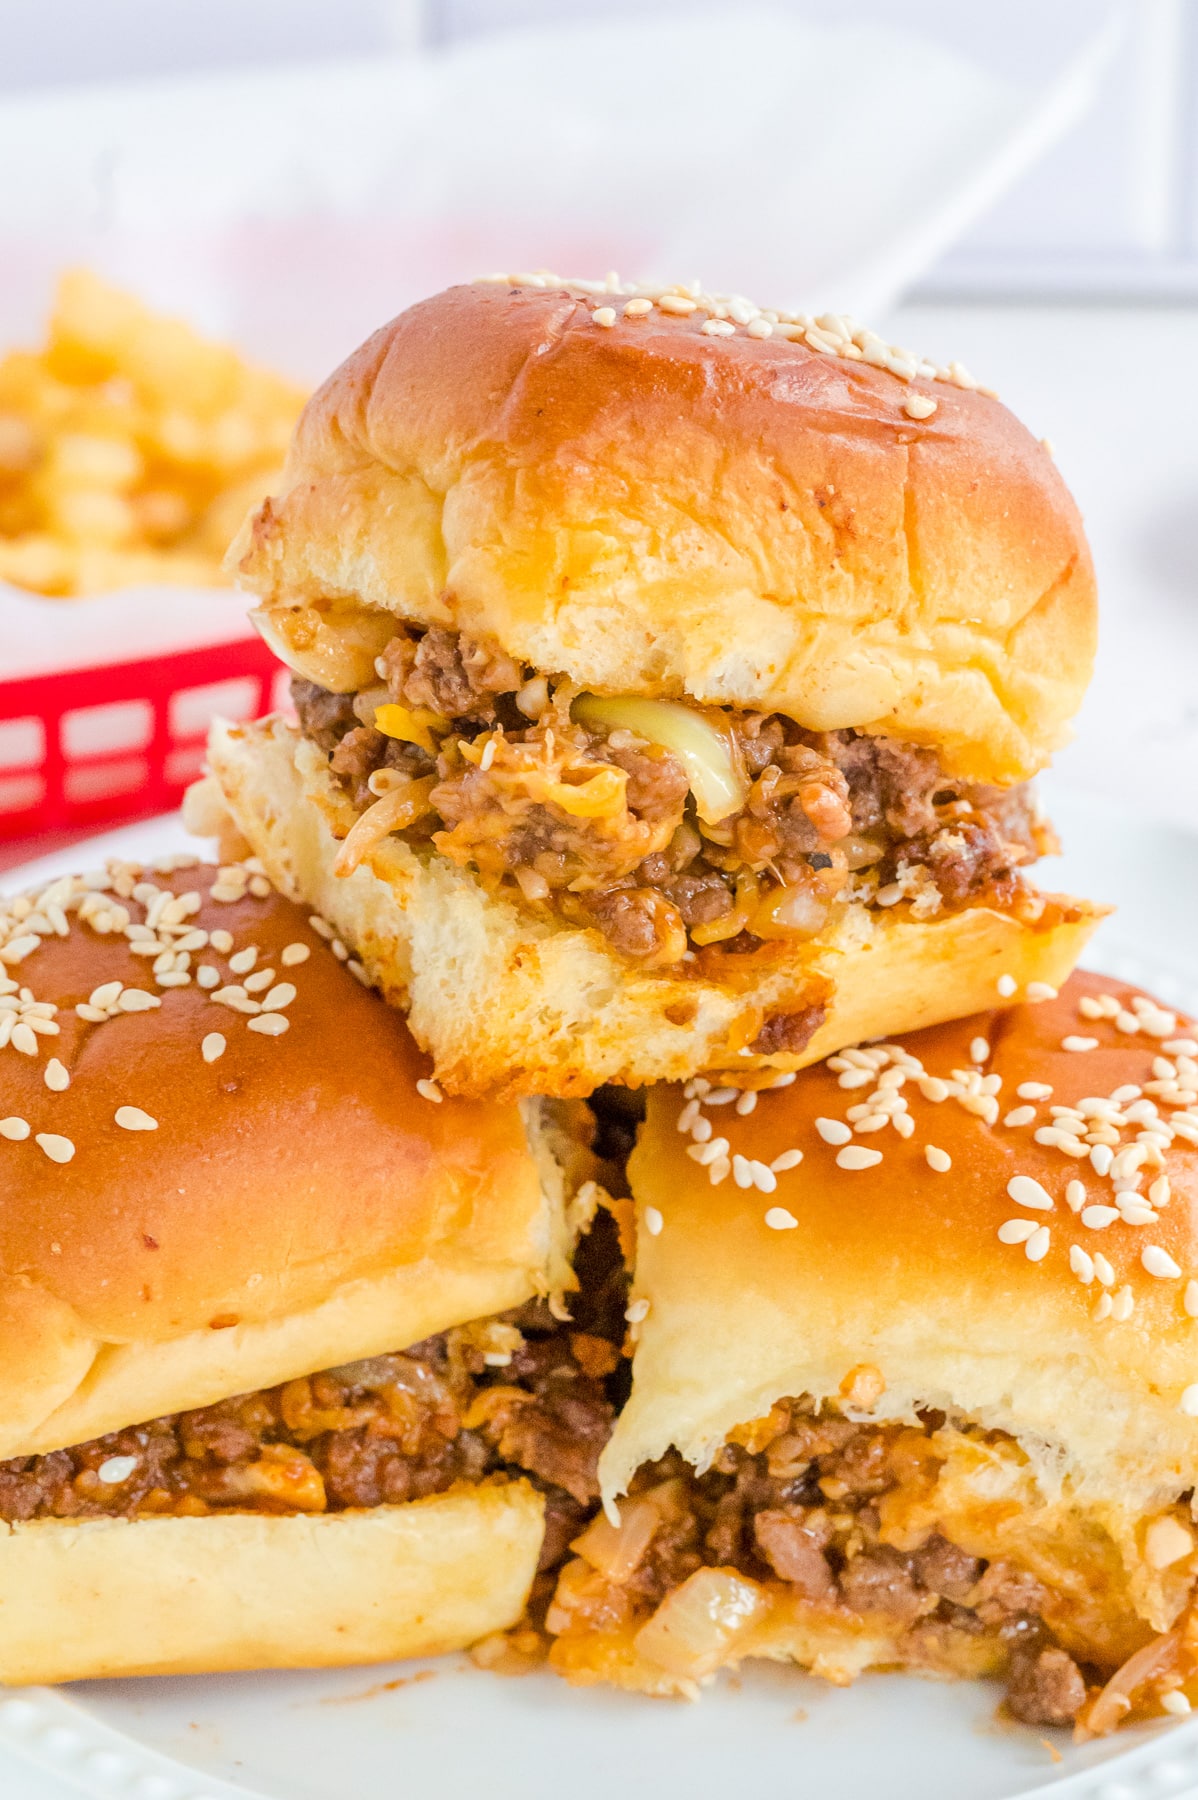 Three sloppy joe sliders stacked on a plate close up from the side with fries in the background.